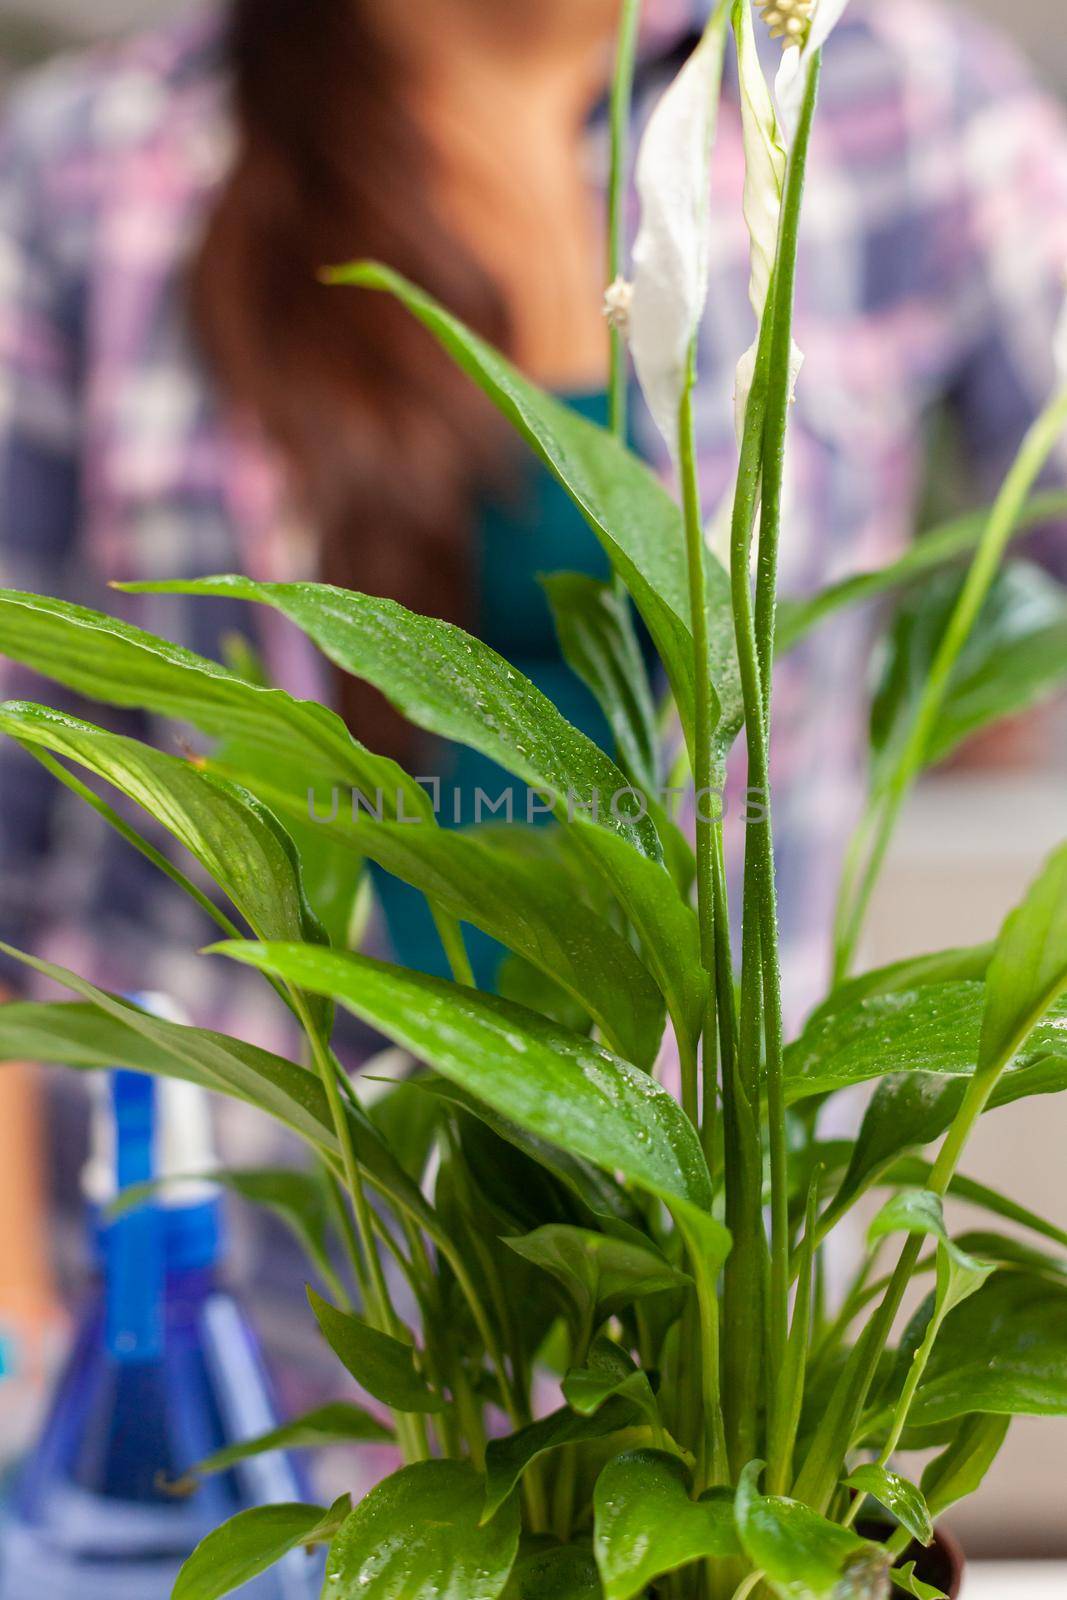 Woman caring for house plant in kitchen spraying them. Decorative, plants, growing, lifestyle, design, botanica, dirt, domestic, growh, leaf, hobby, seeding, happy.